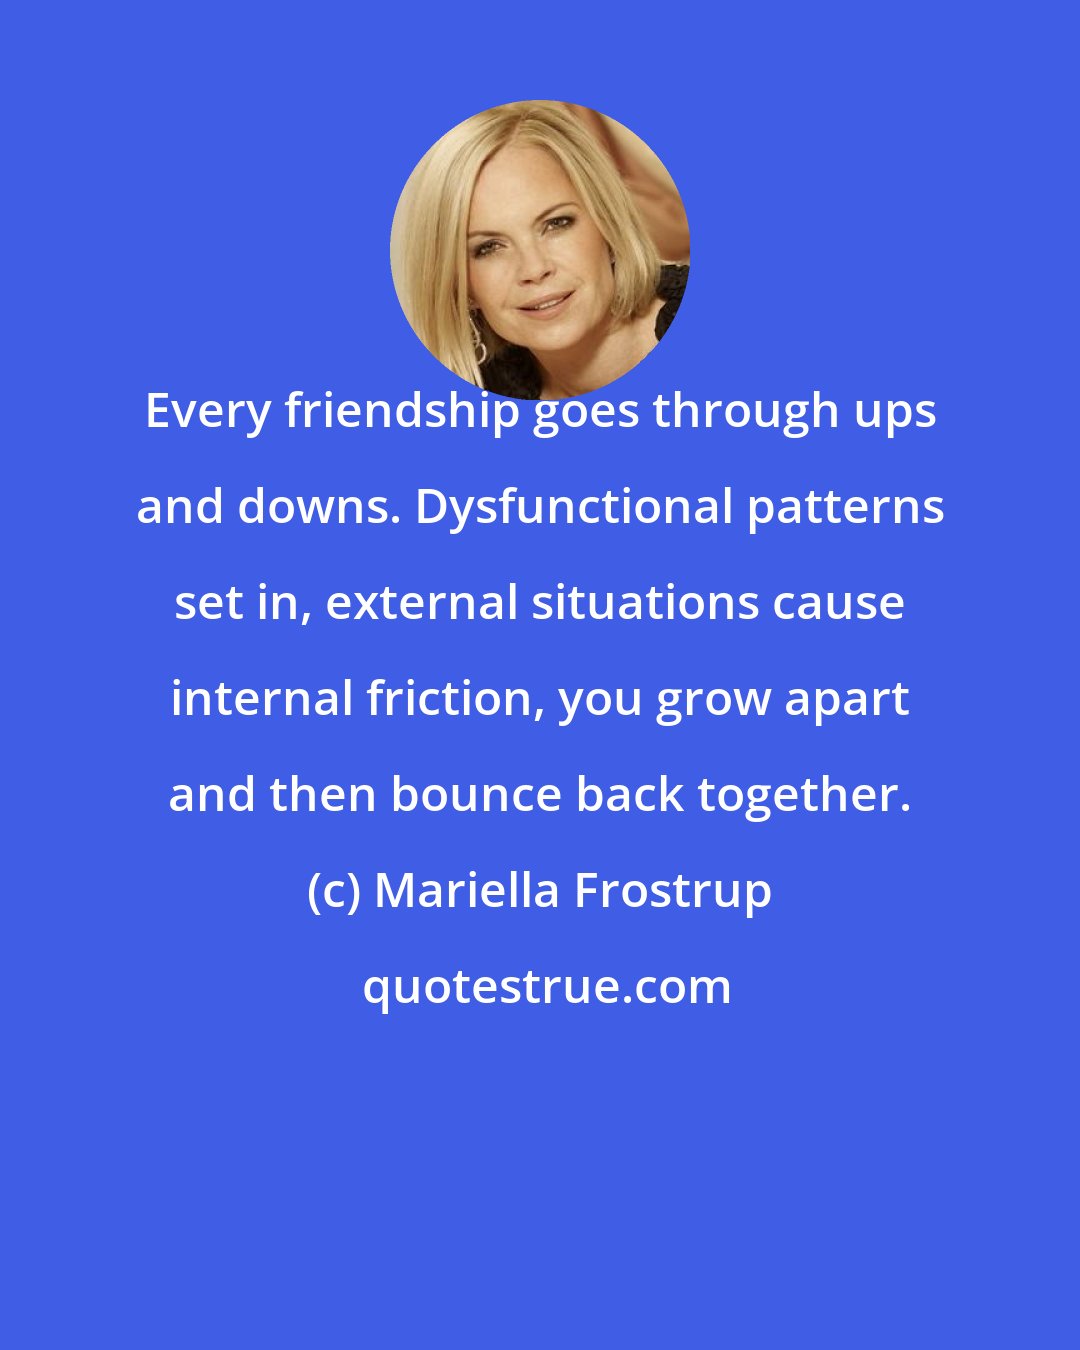 Mariella Frostrup: Every friendship goes through ups and downs. Dysfunctional patterns set in, external situations cause internal friction, you grow apart and then bounce back together.